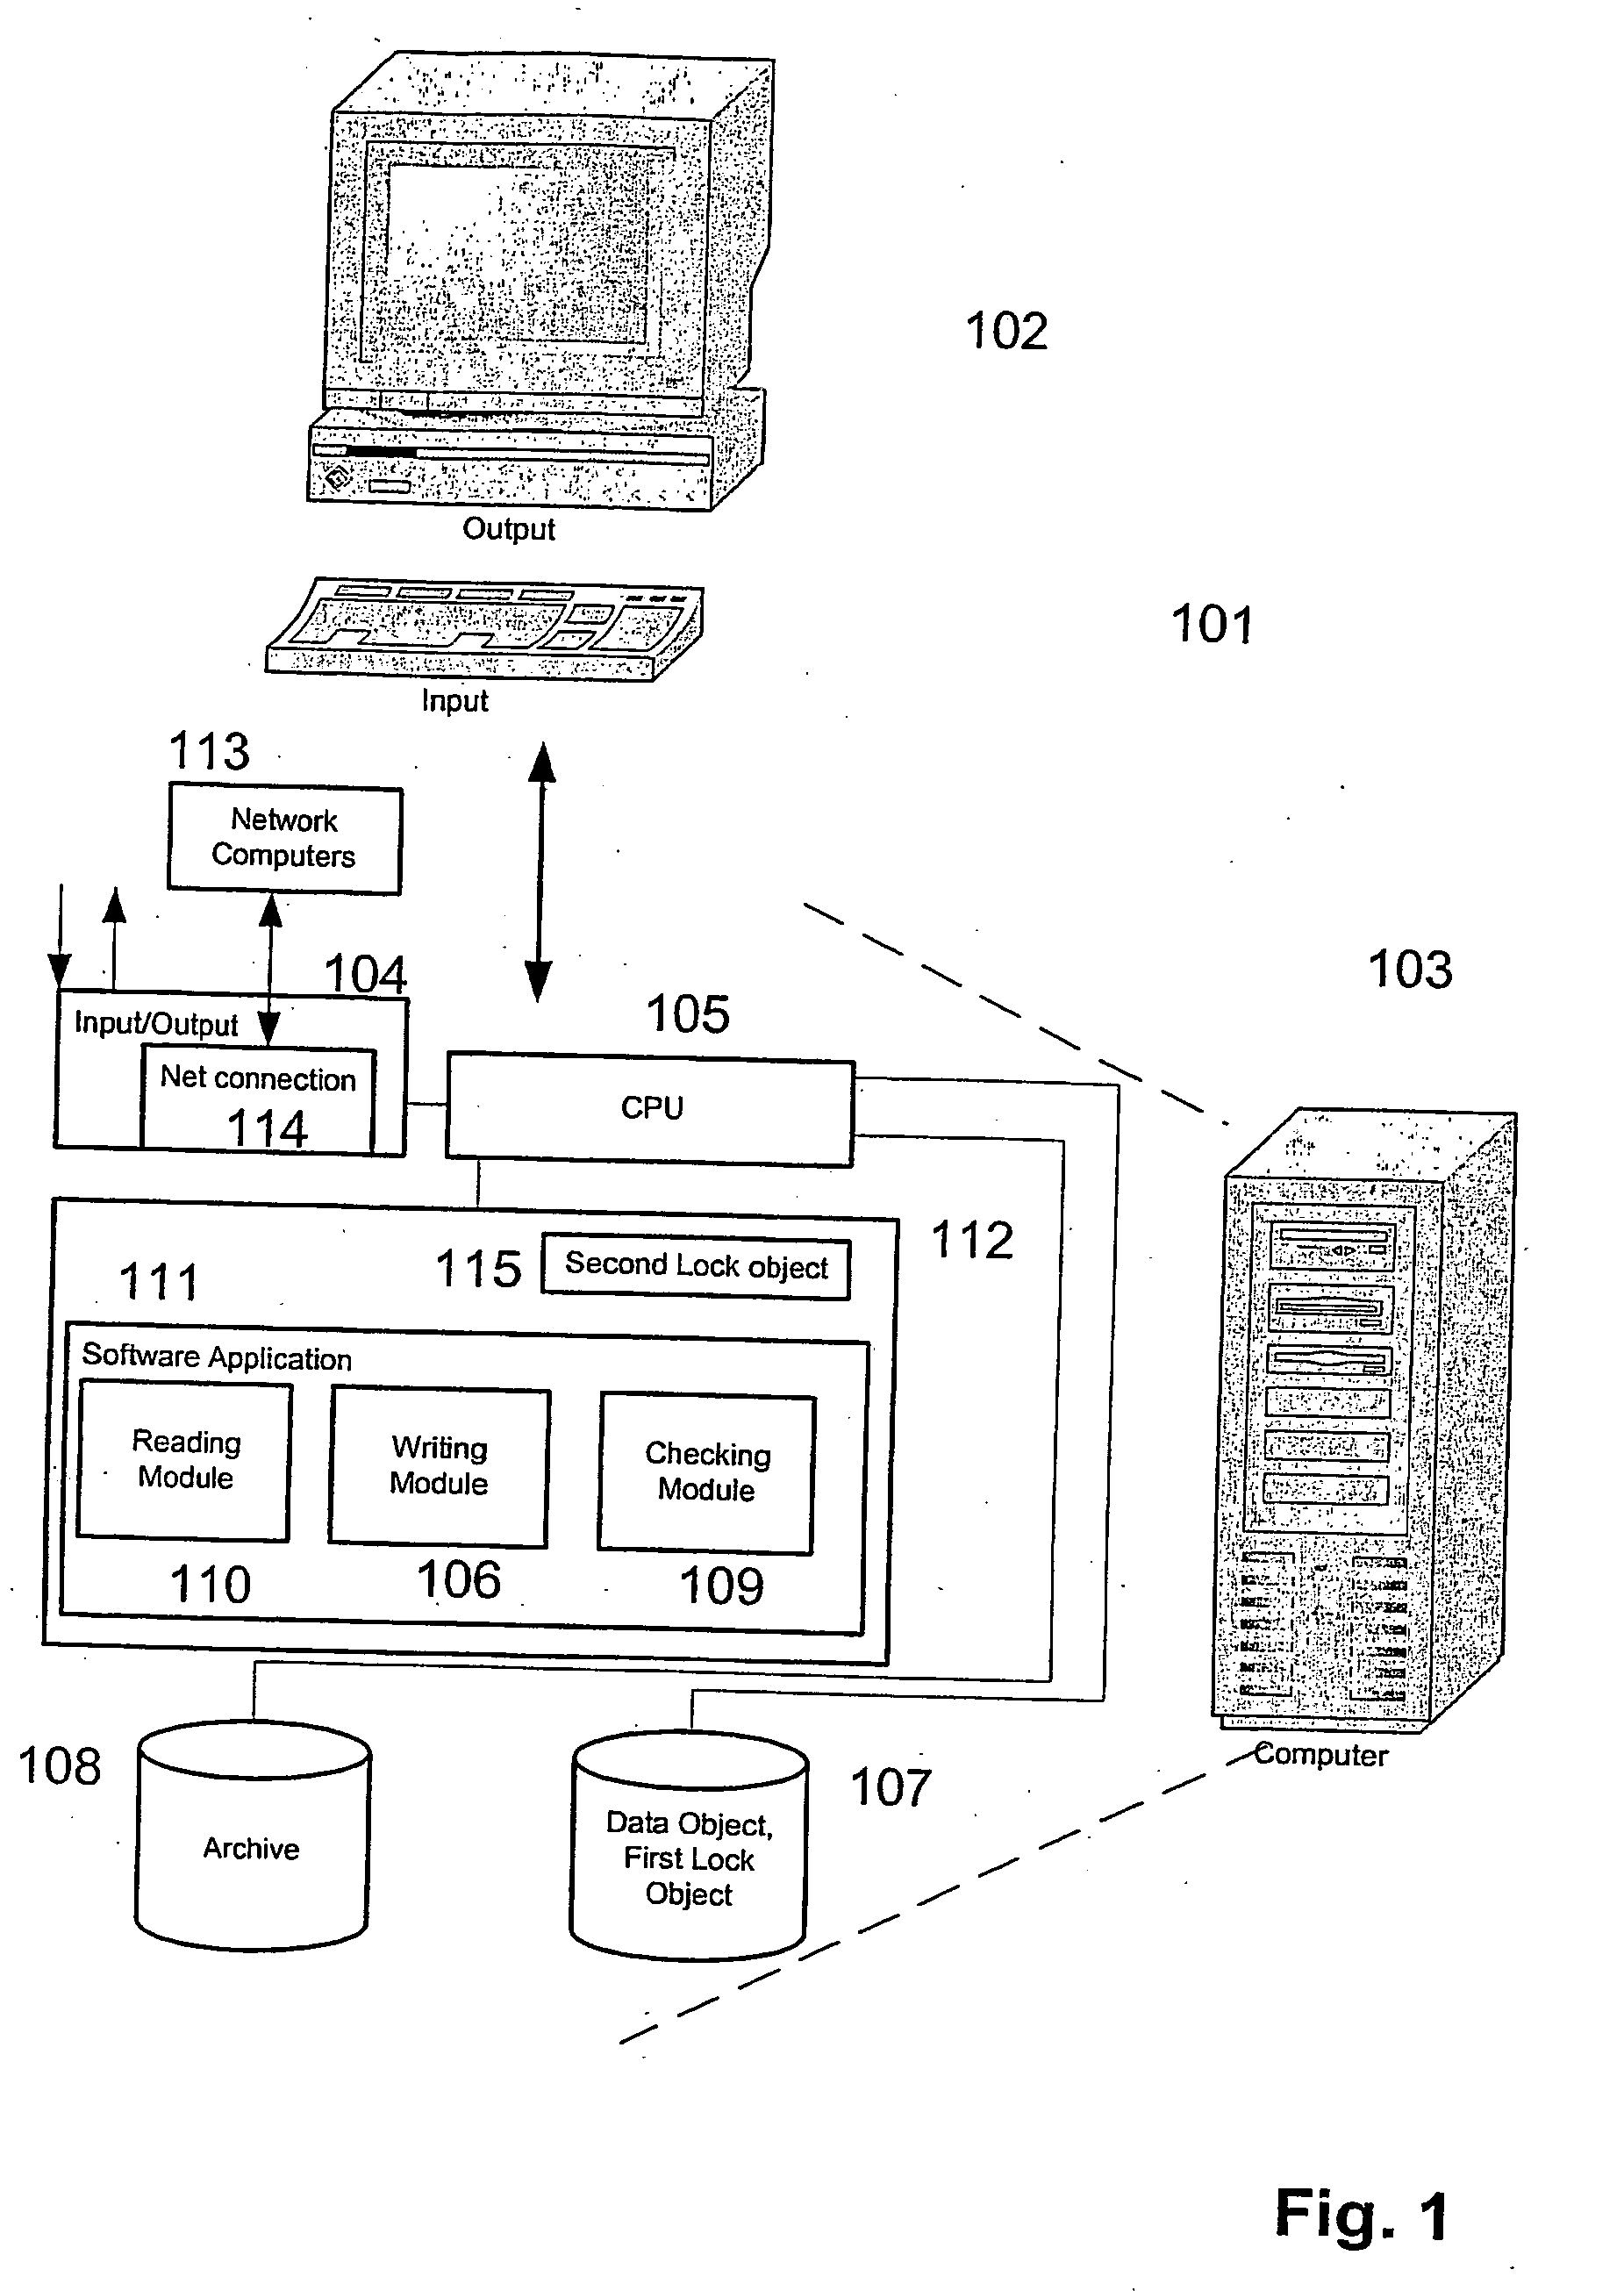 Electronic data structure for controlling access to data objects using locks